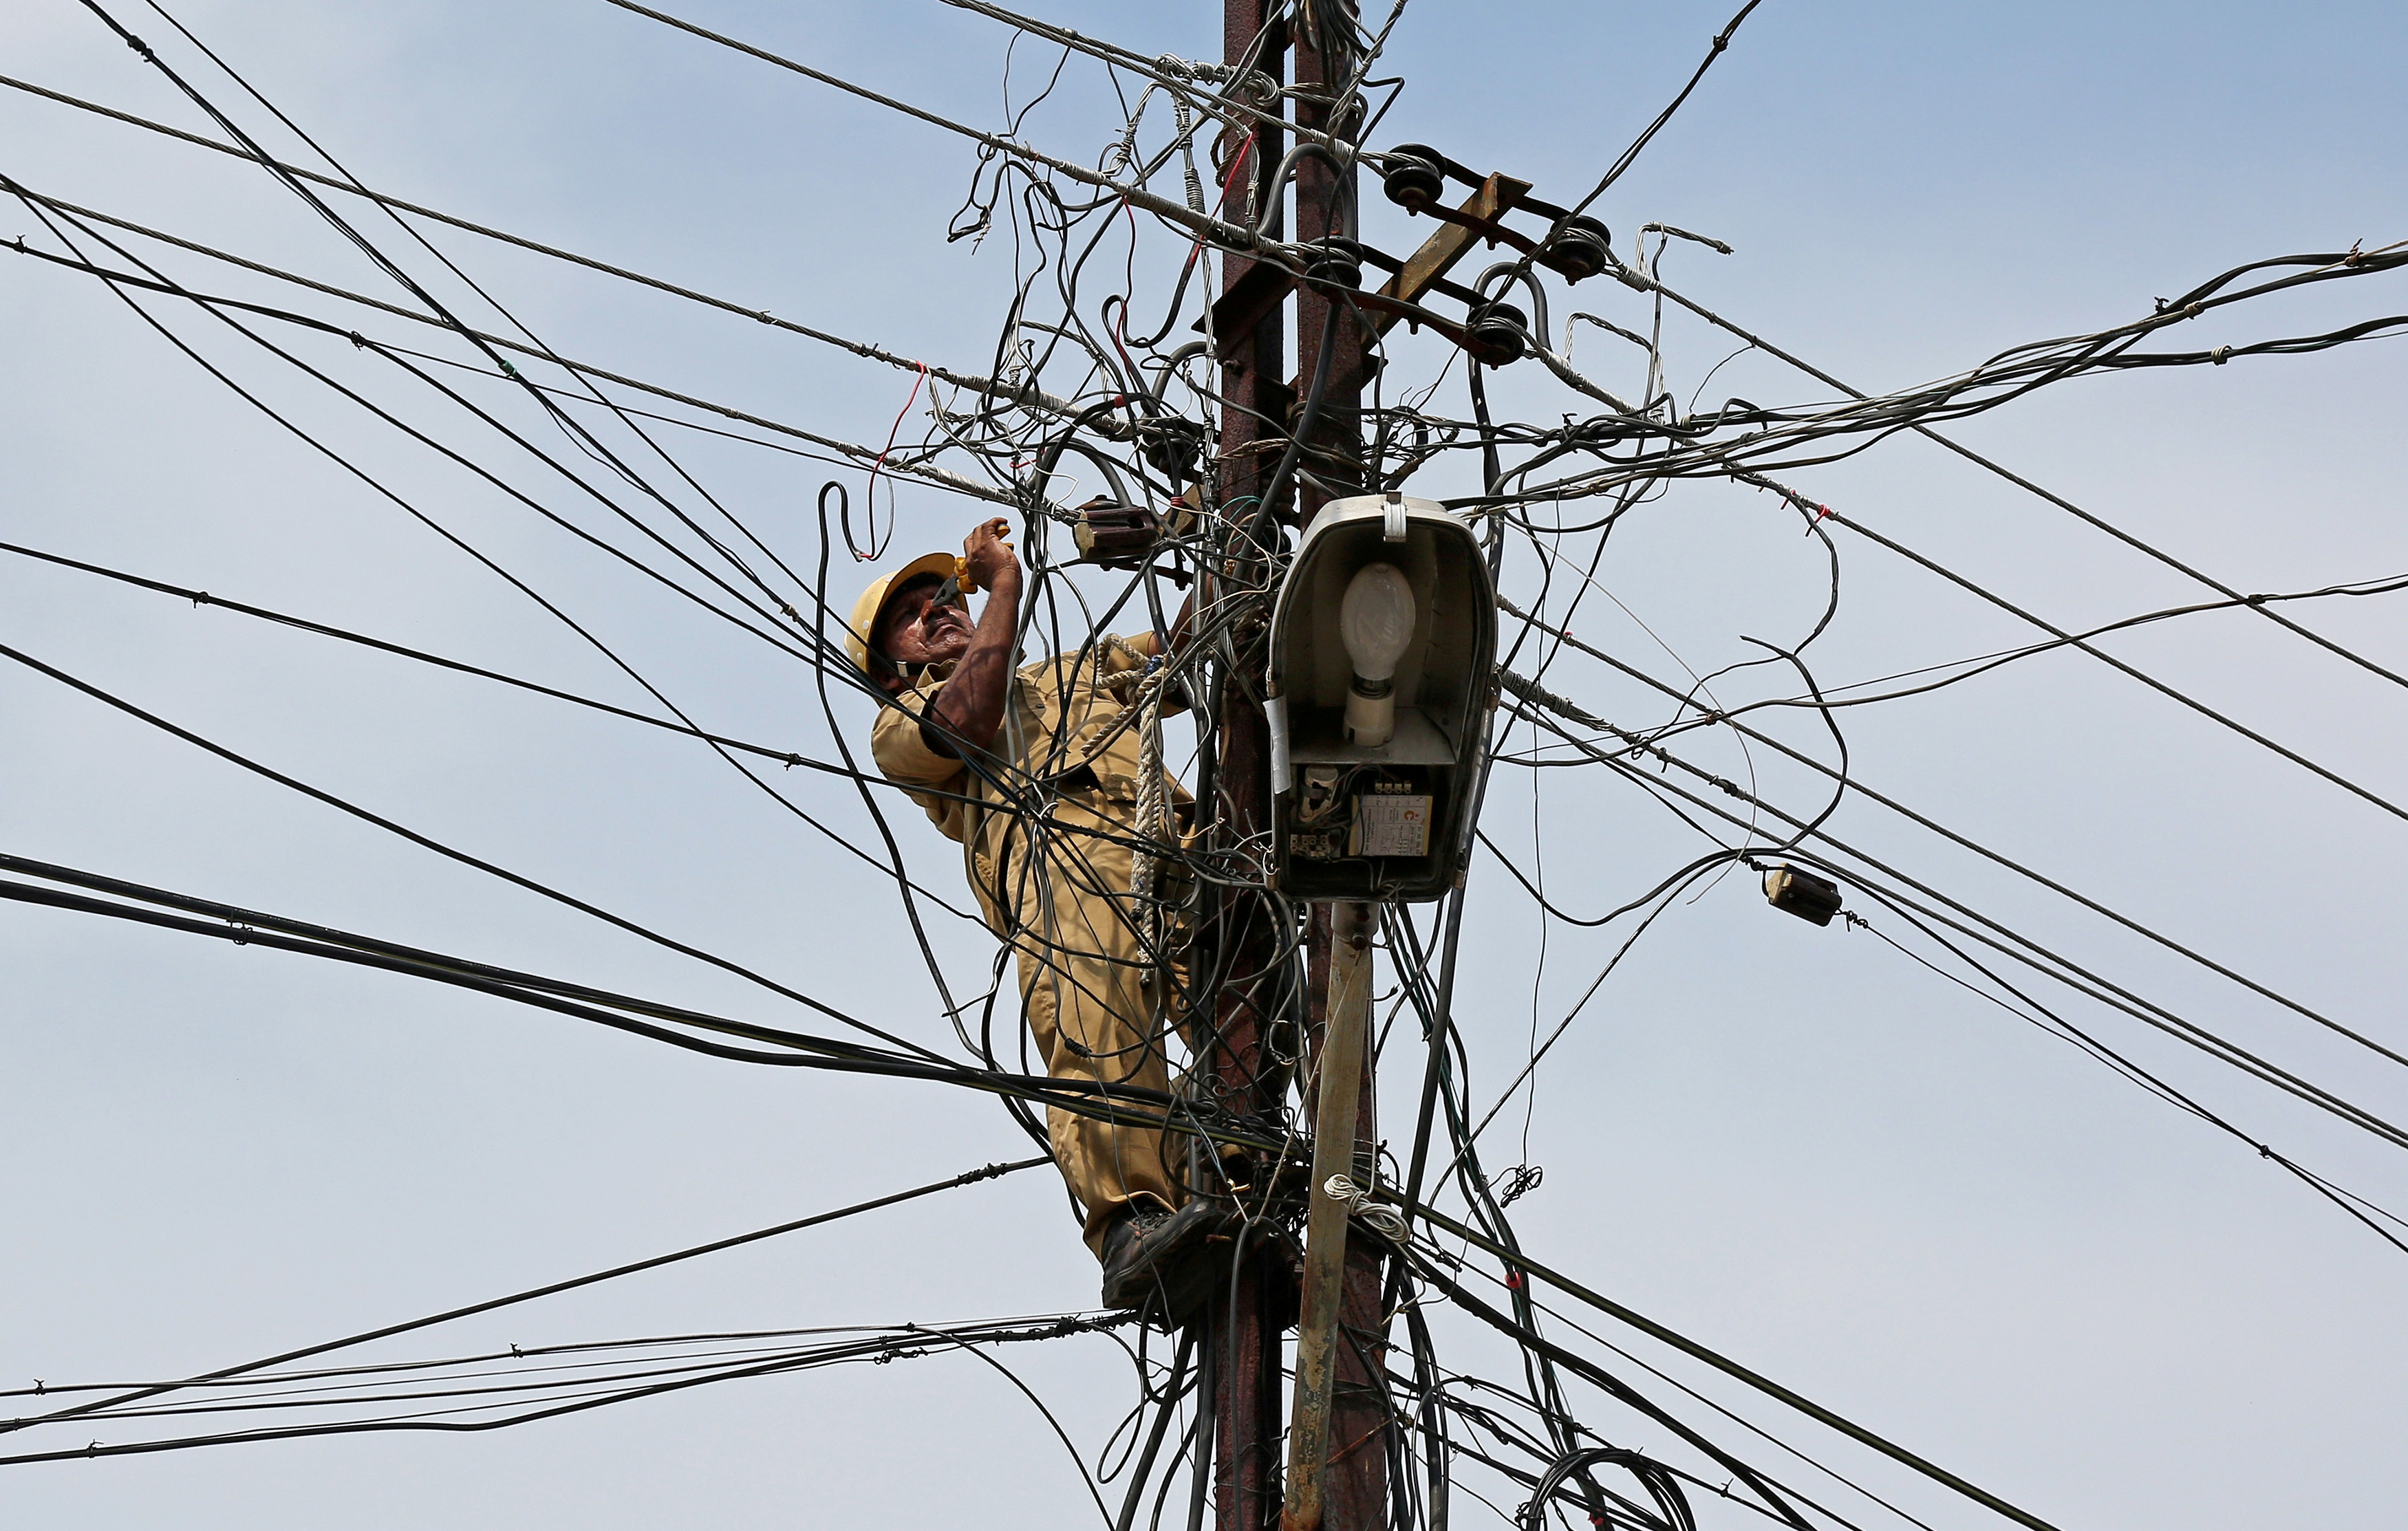 A worker repairs power lines on a pole in Kochi